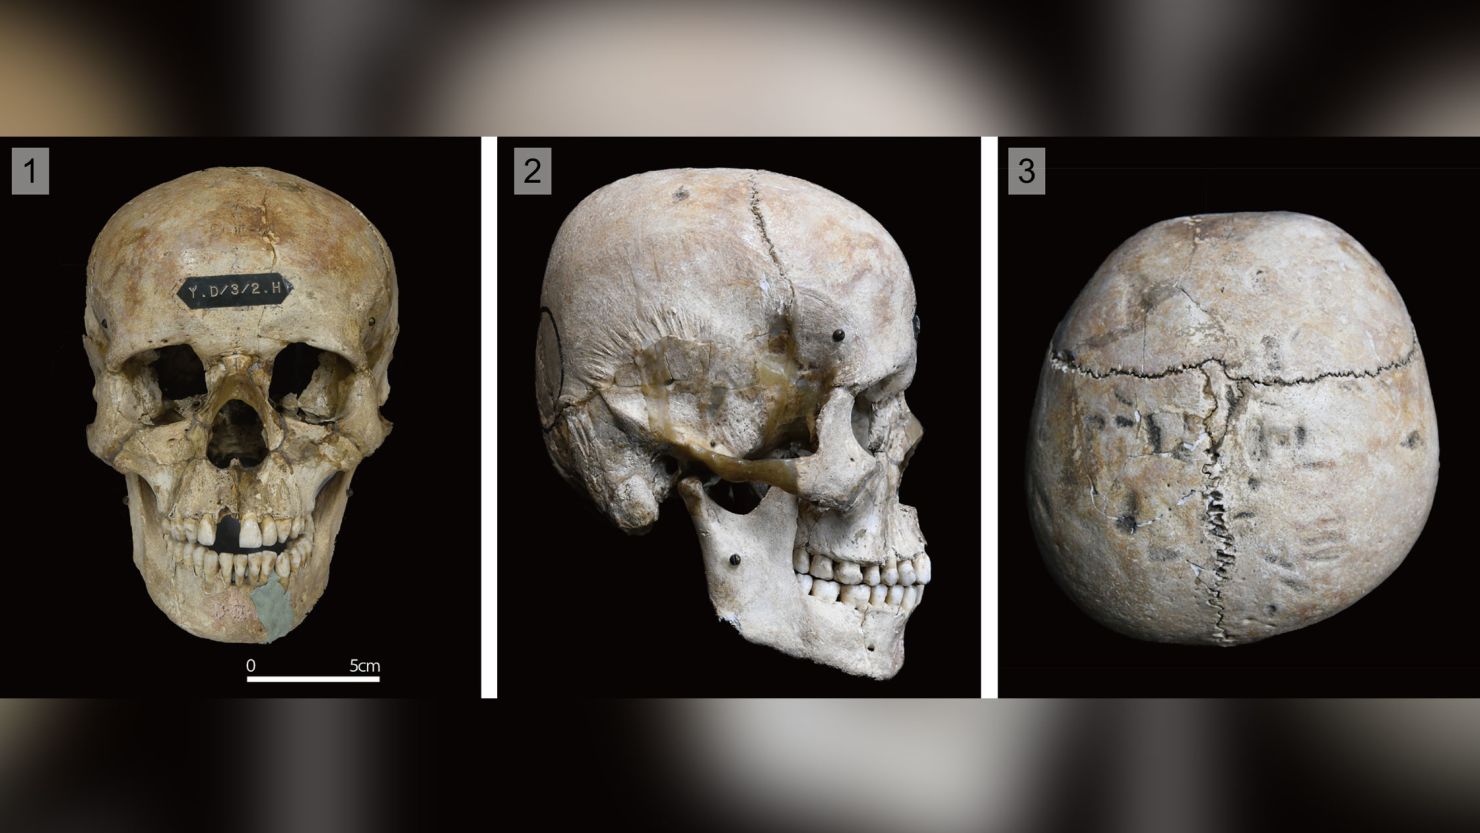 The skull of individual "HT4" from the Hirota site on the island of Tanegashima in Japan is shown (from left) in frontal, right-lateral and superior views.